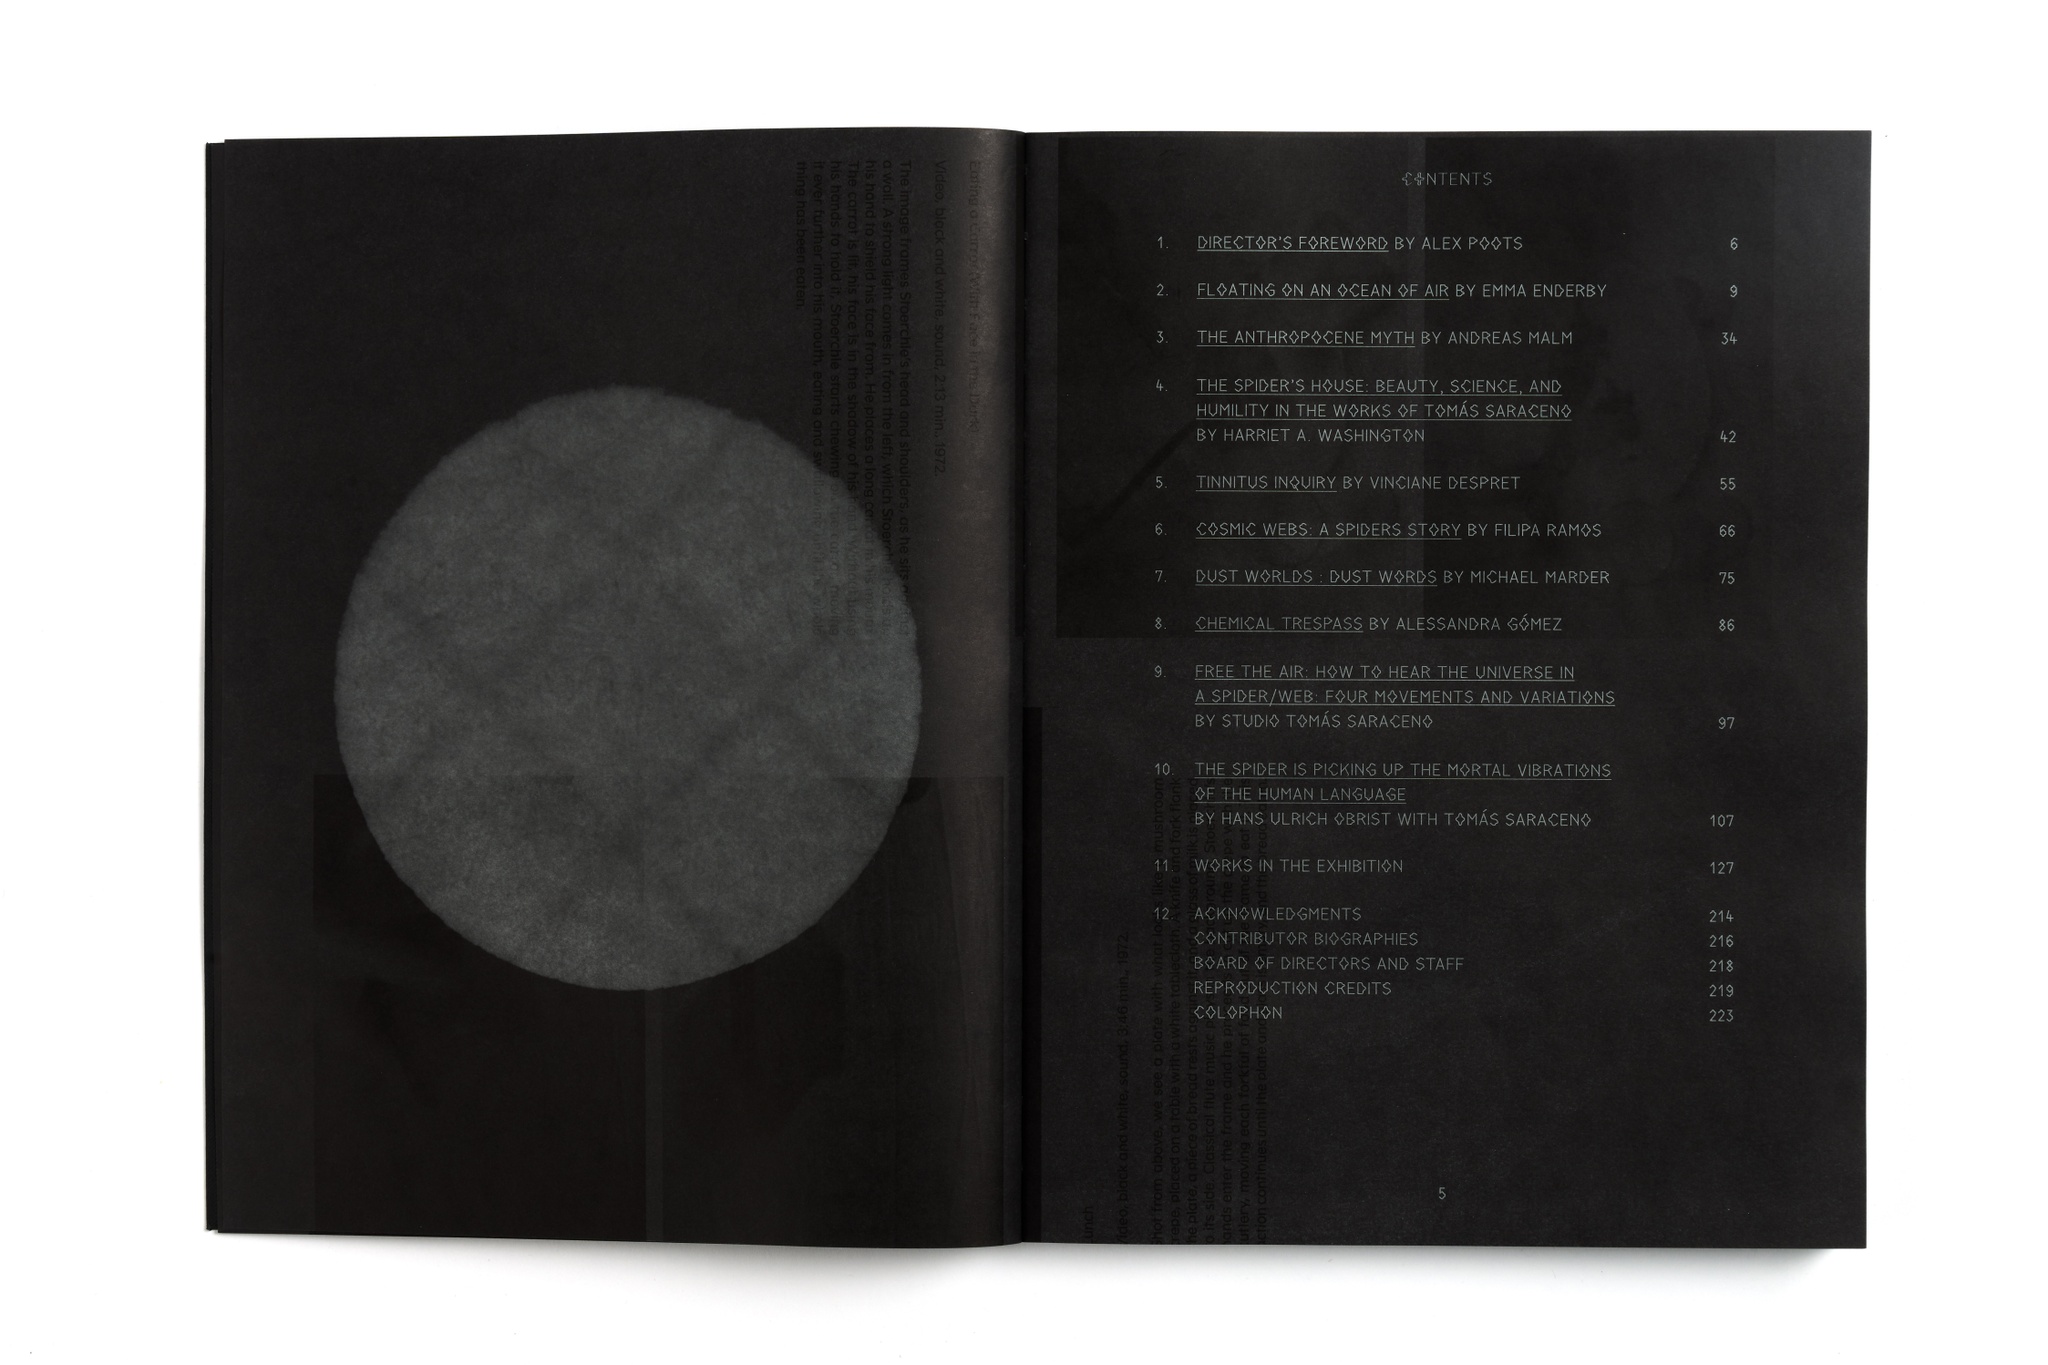 An exhibition catalogue lying open on a white surface. The book has black pages and its table of contents is listed in silvery text.